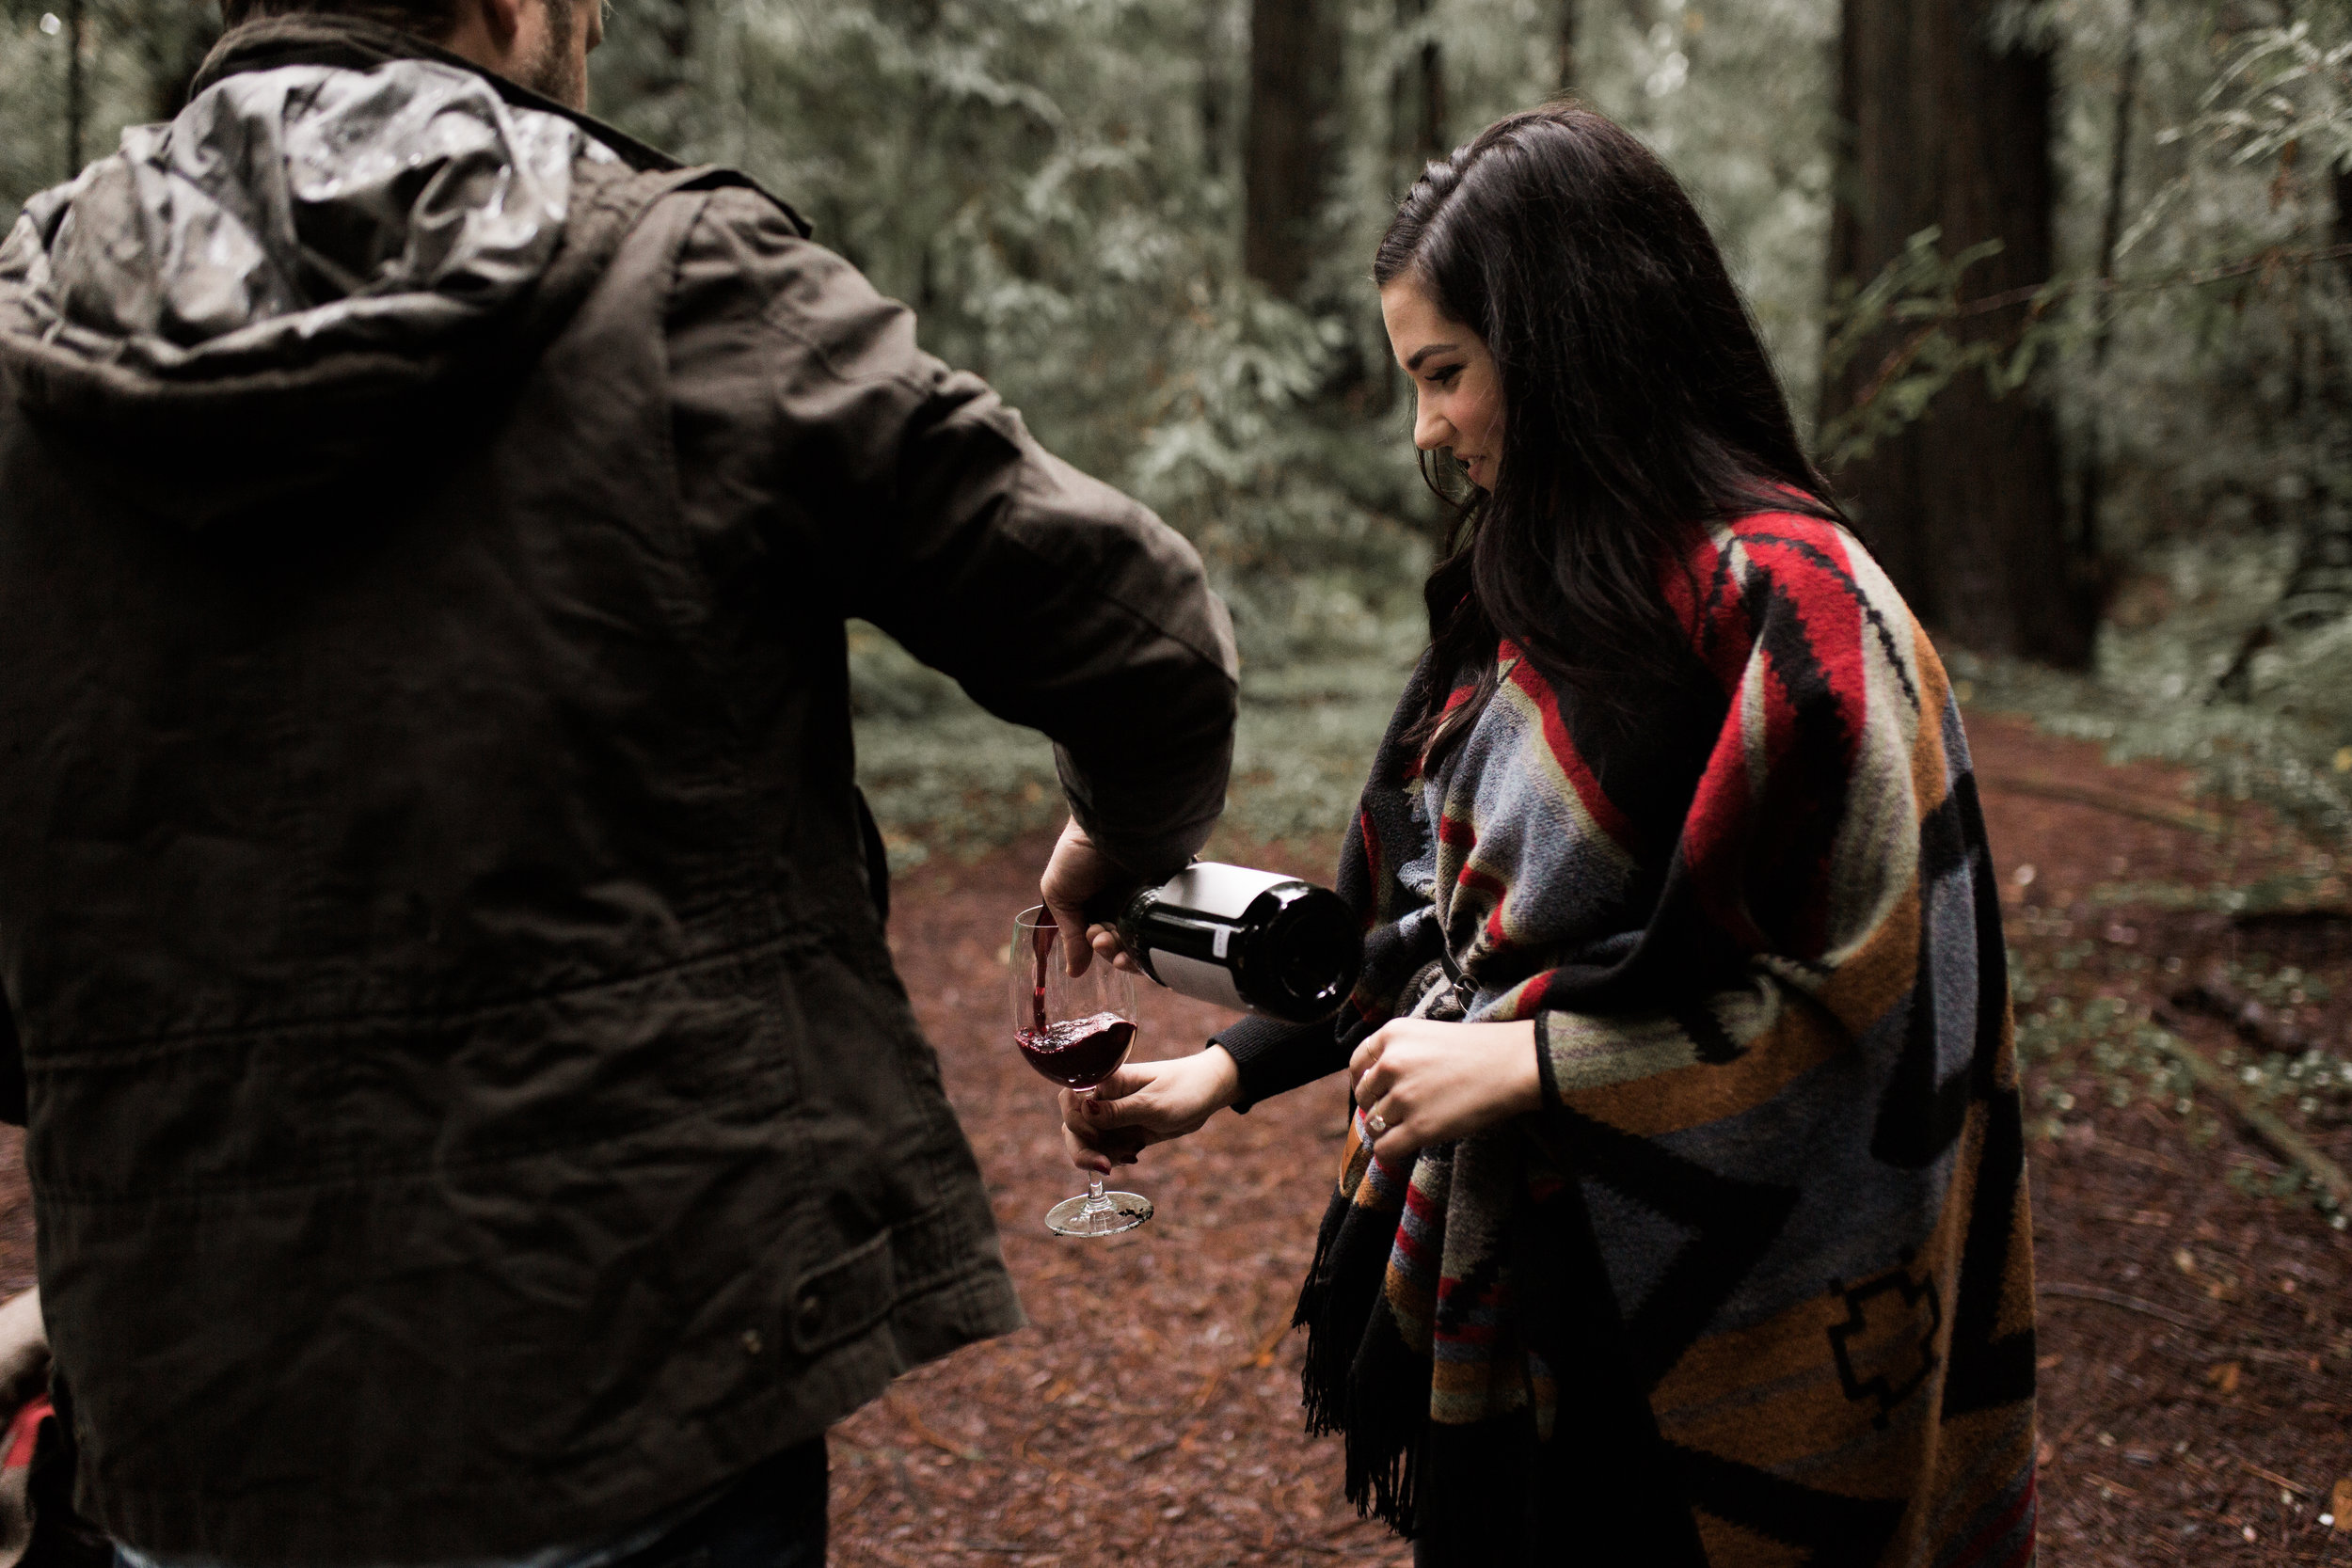 nicole-daacke-photography-redwoods-national-park-forest-rainy-foggy-adventure-engagement-session-humboldt-county-old-growth-redwood-tree-elopement-intimate-wedding-photographer-3.jpg